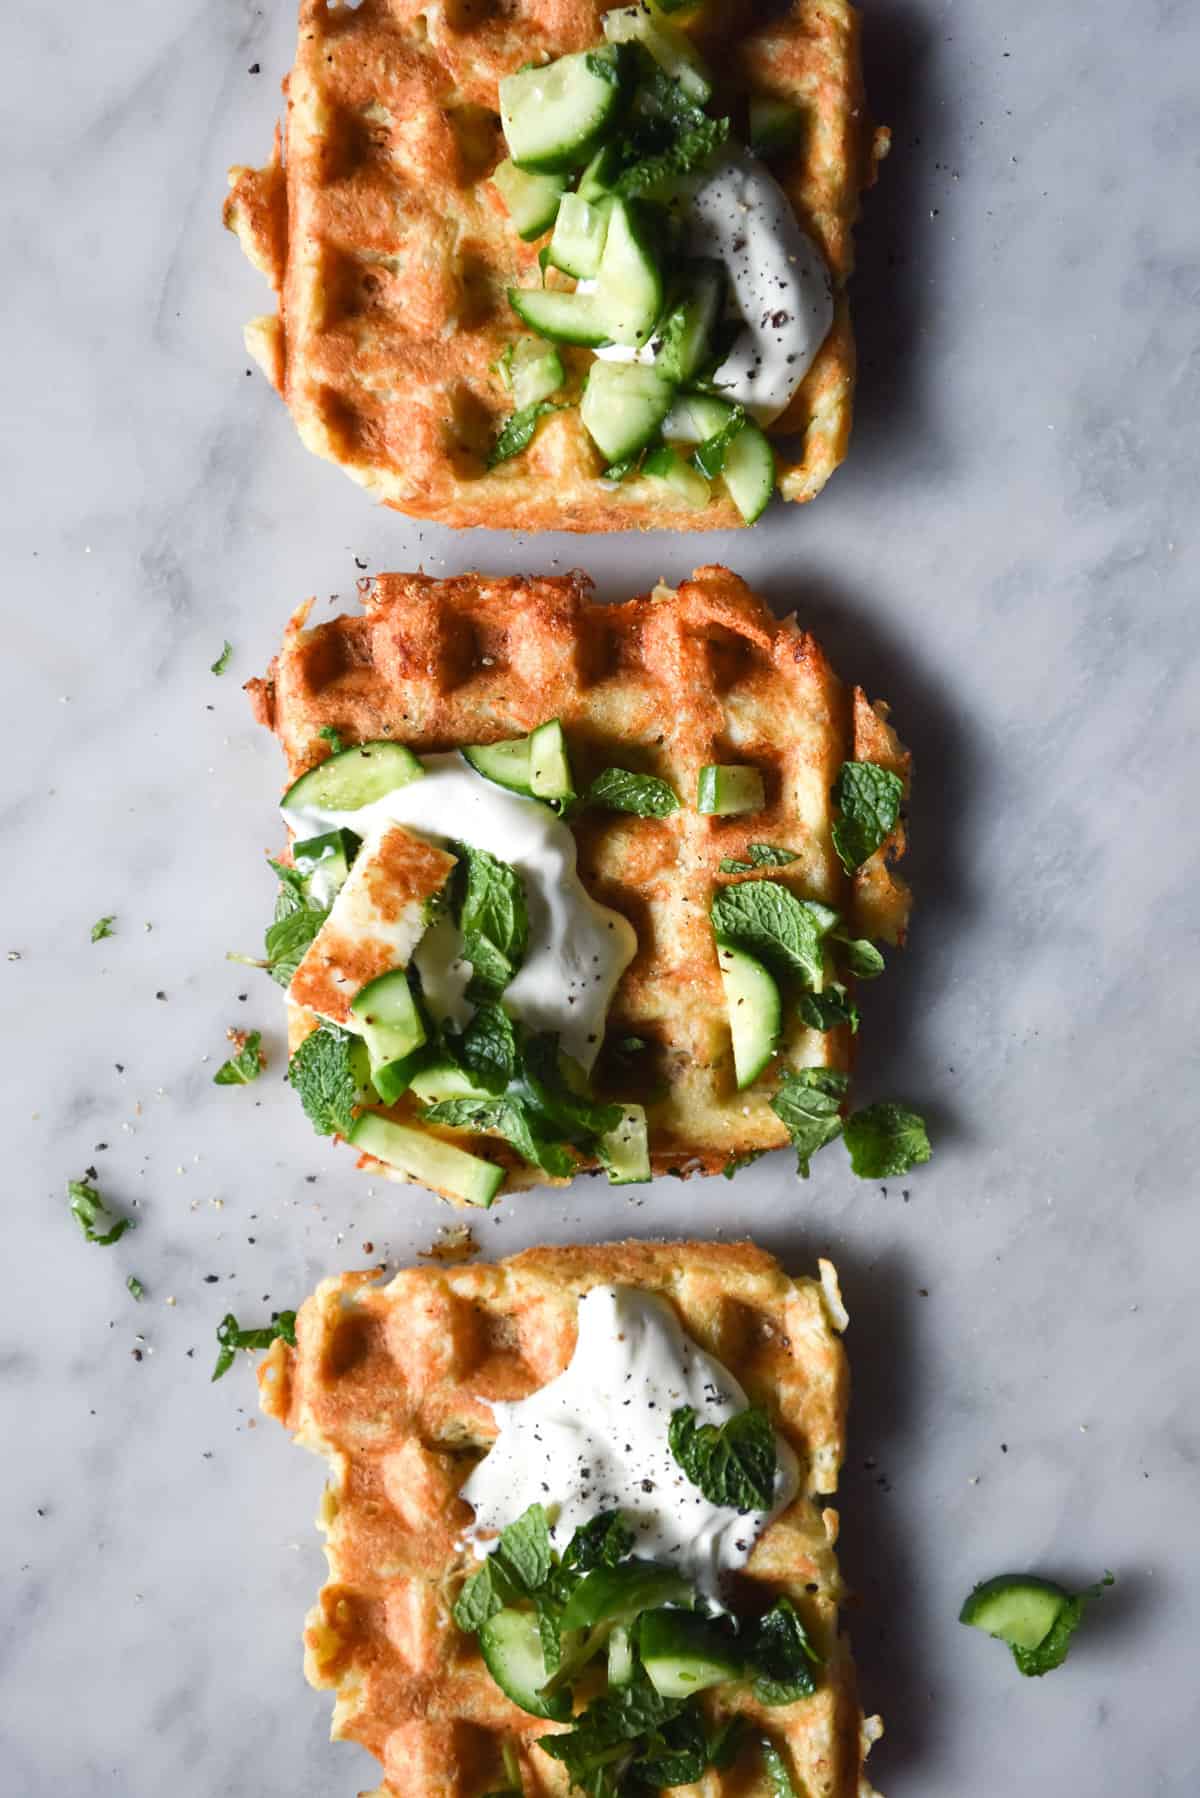 An aerial image of three potato waffles lined up on a white marble table. The waffles are topped with cucumbers, herbs, yoghurt and small pieces of haloumi.